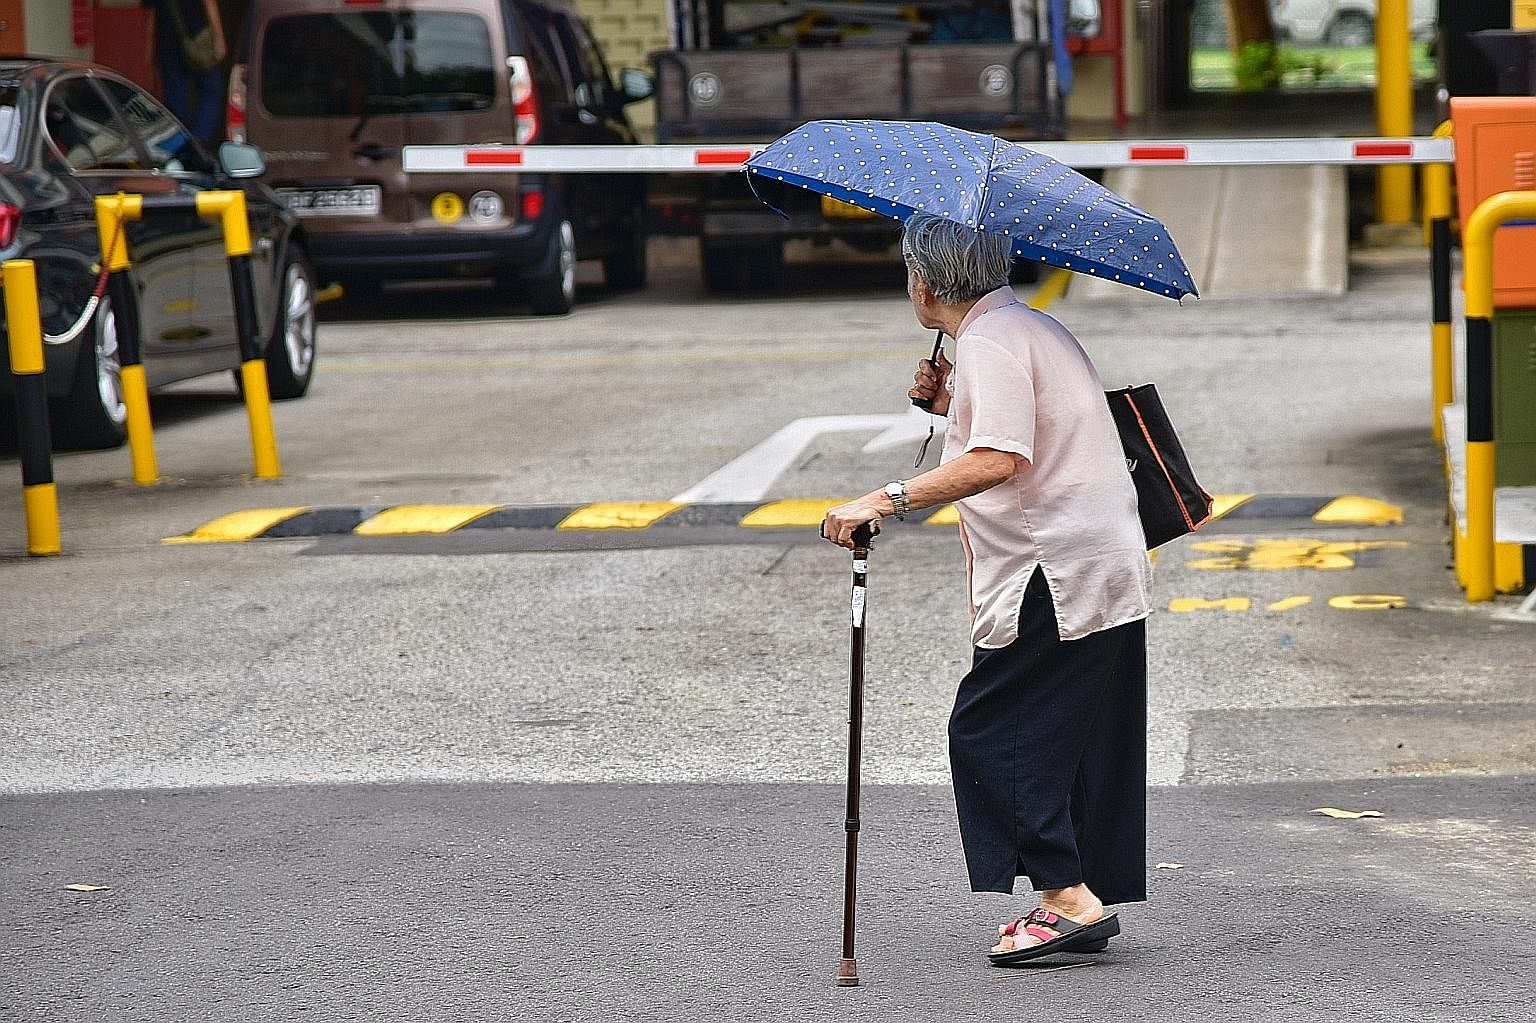 According to estimates from the Ministry of Health, half of Singaporeans who are healthy at the age of 65 are at risk of developing a long-term disability over their lifetimes.